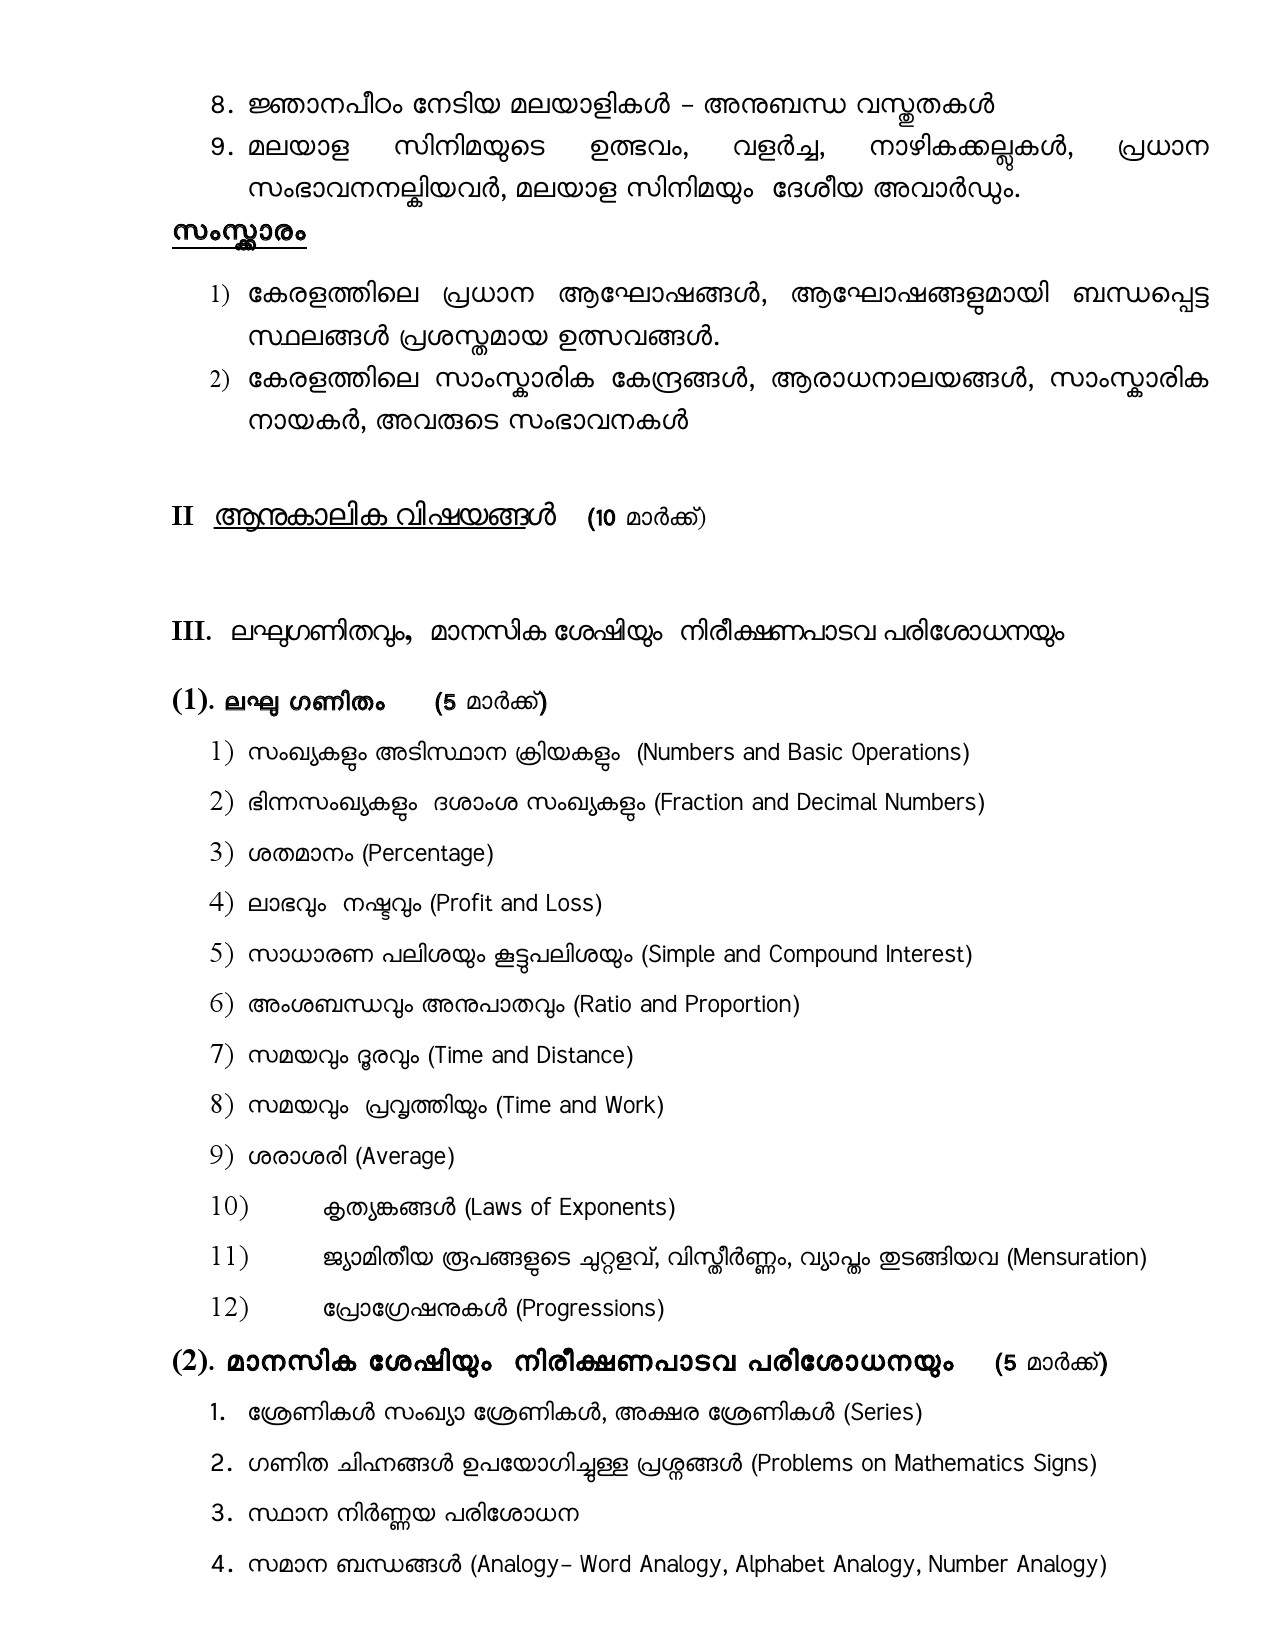 Syllabus For 2023 OMR Examination Of Civil Police Officer - Notification Image 7